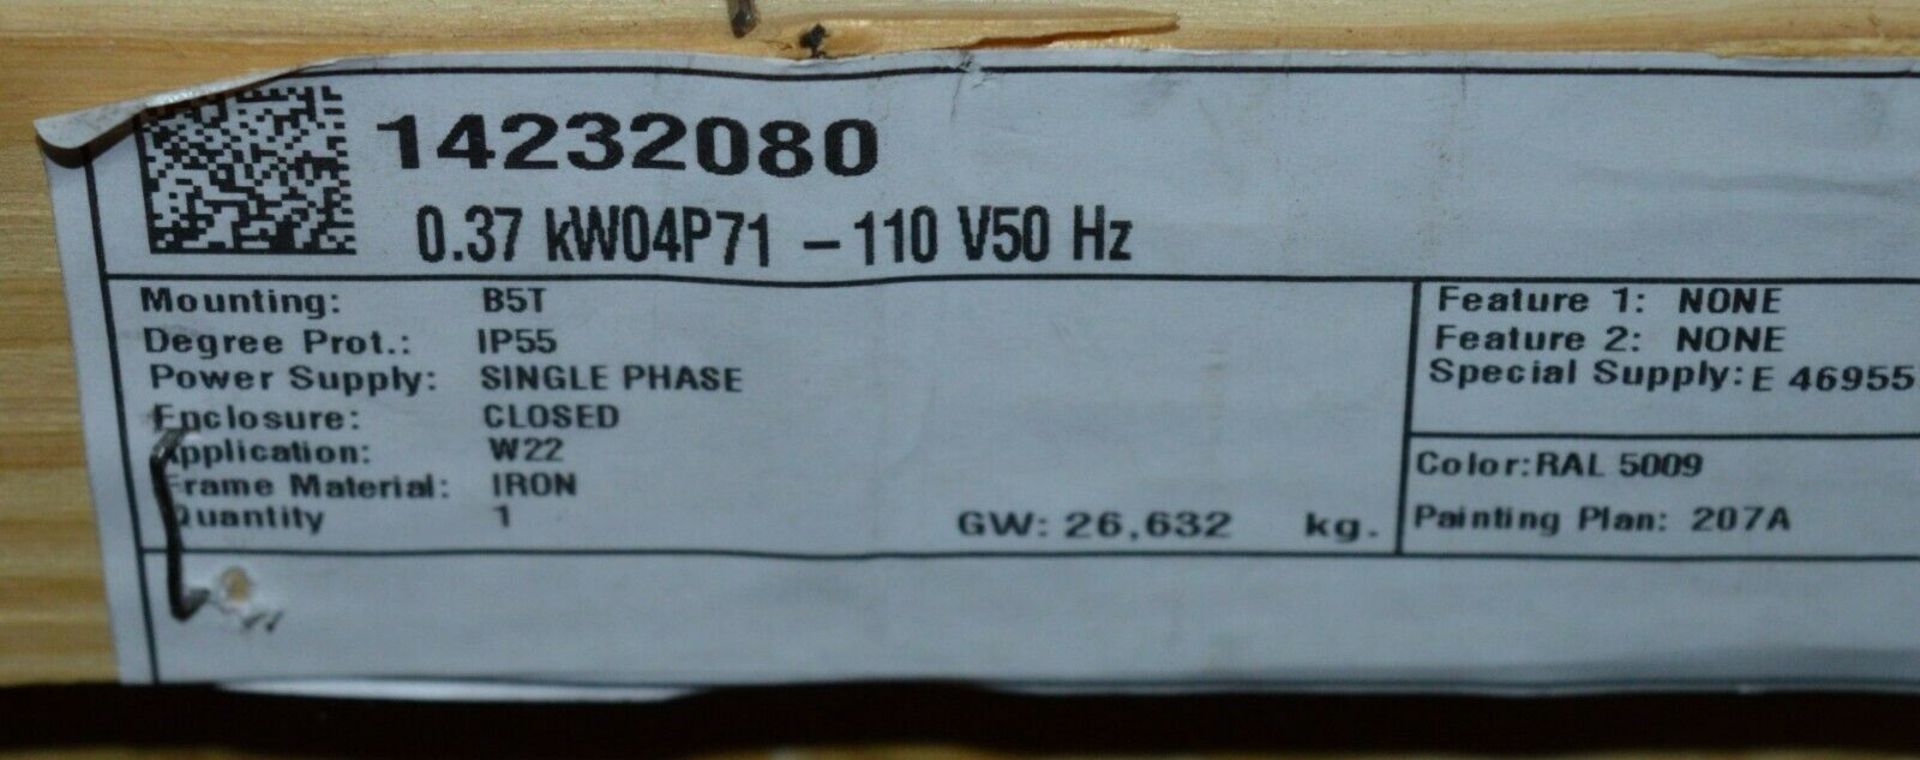 1 x Weg W22 110v IP55 Single Phase Electric Motor - Brand New and Boxed - CL295 - Location: - Image 7 of 7